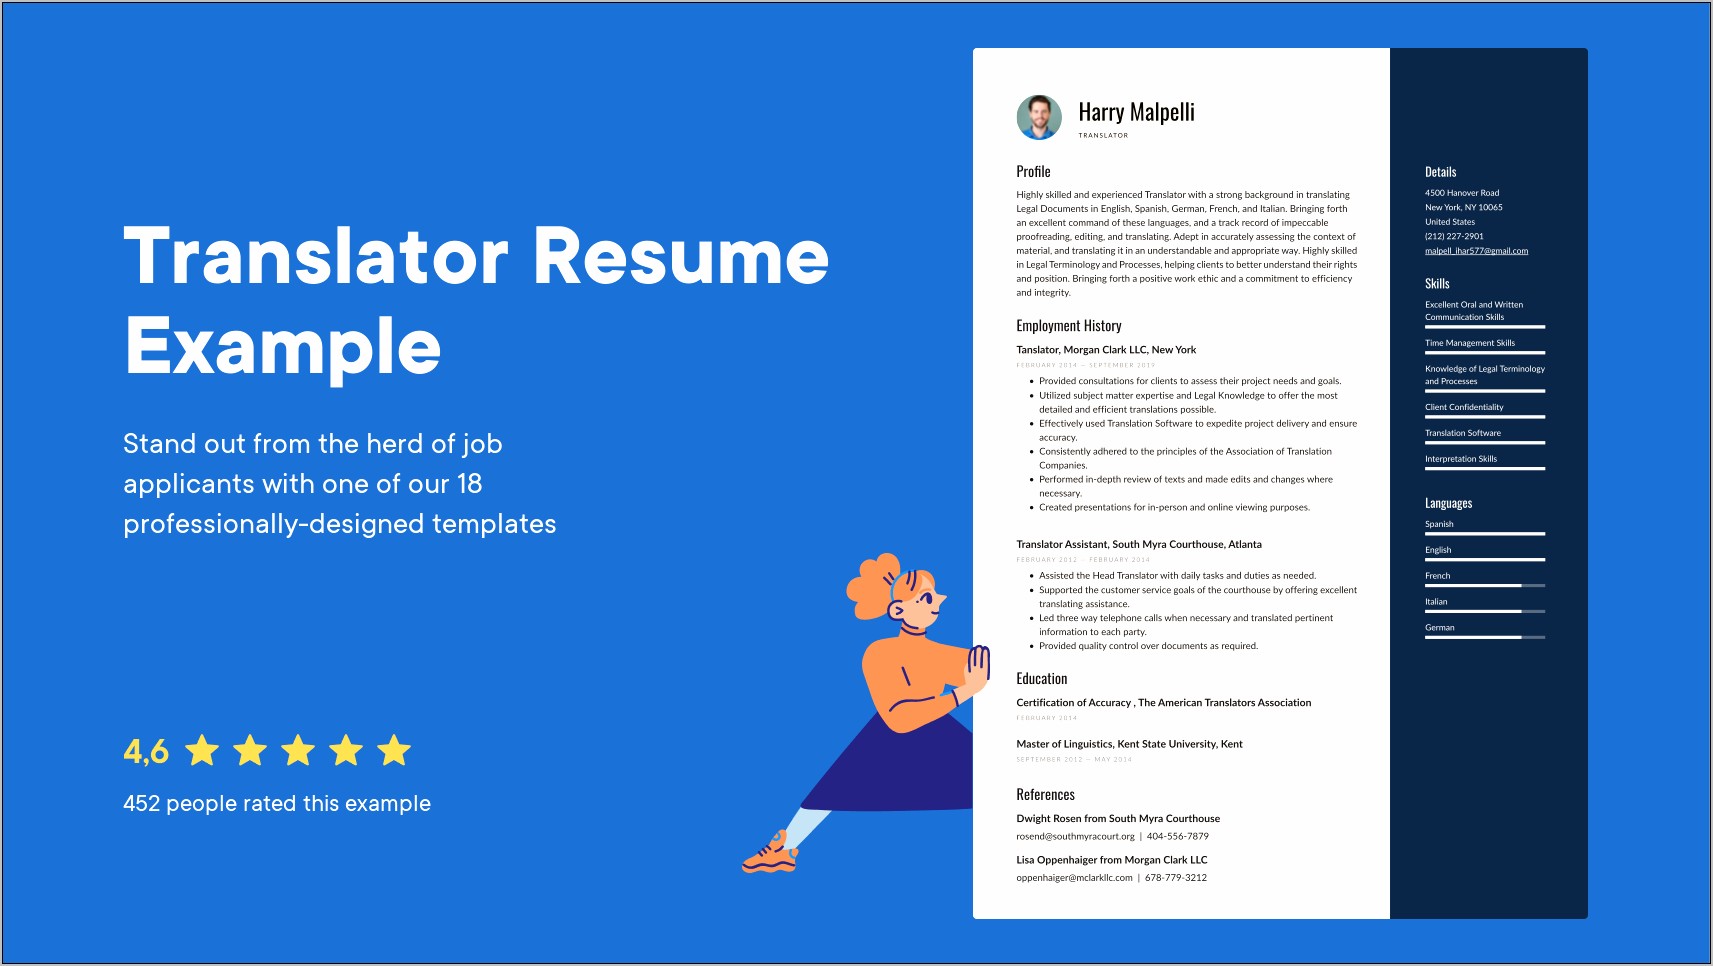 Resume Example Translated Company Website Html Content